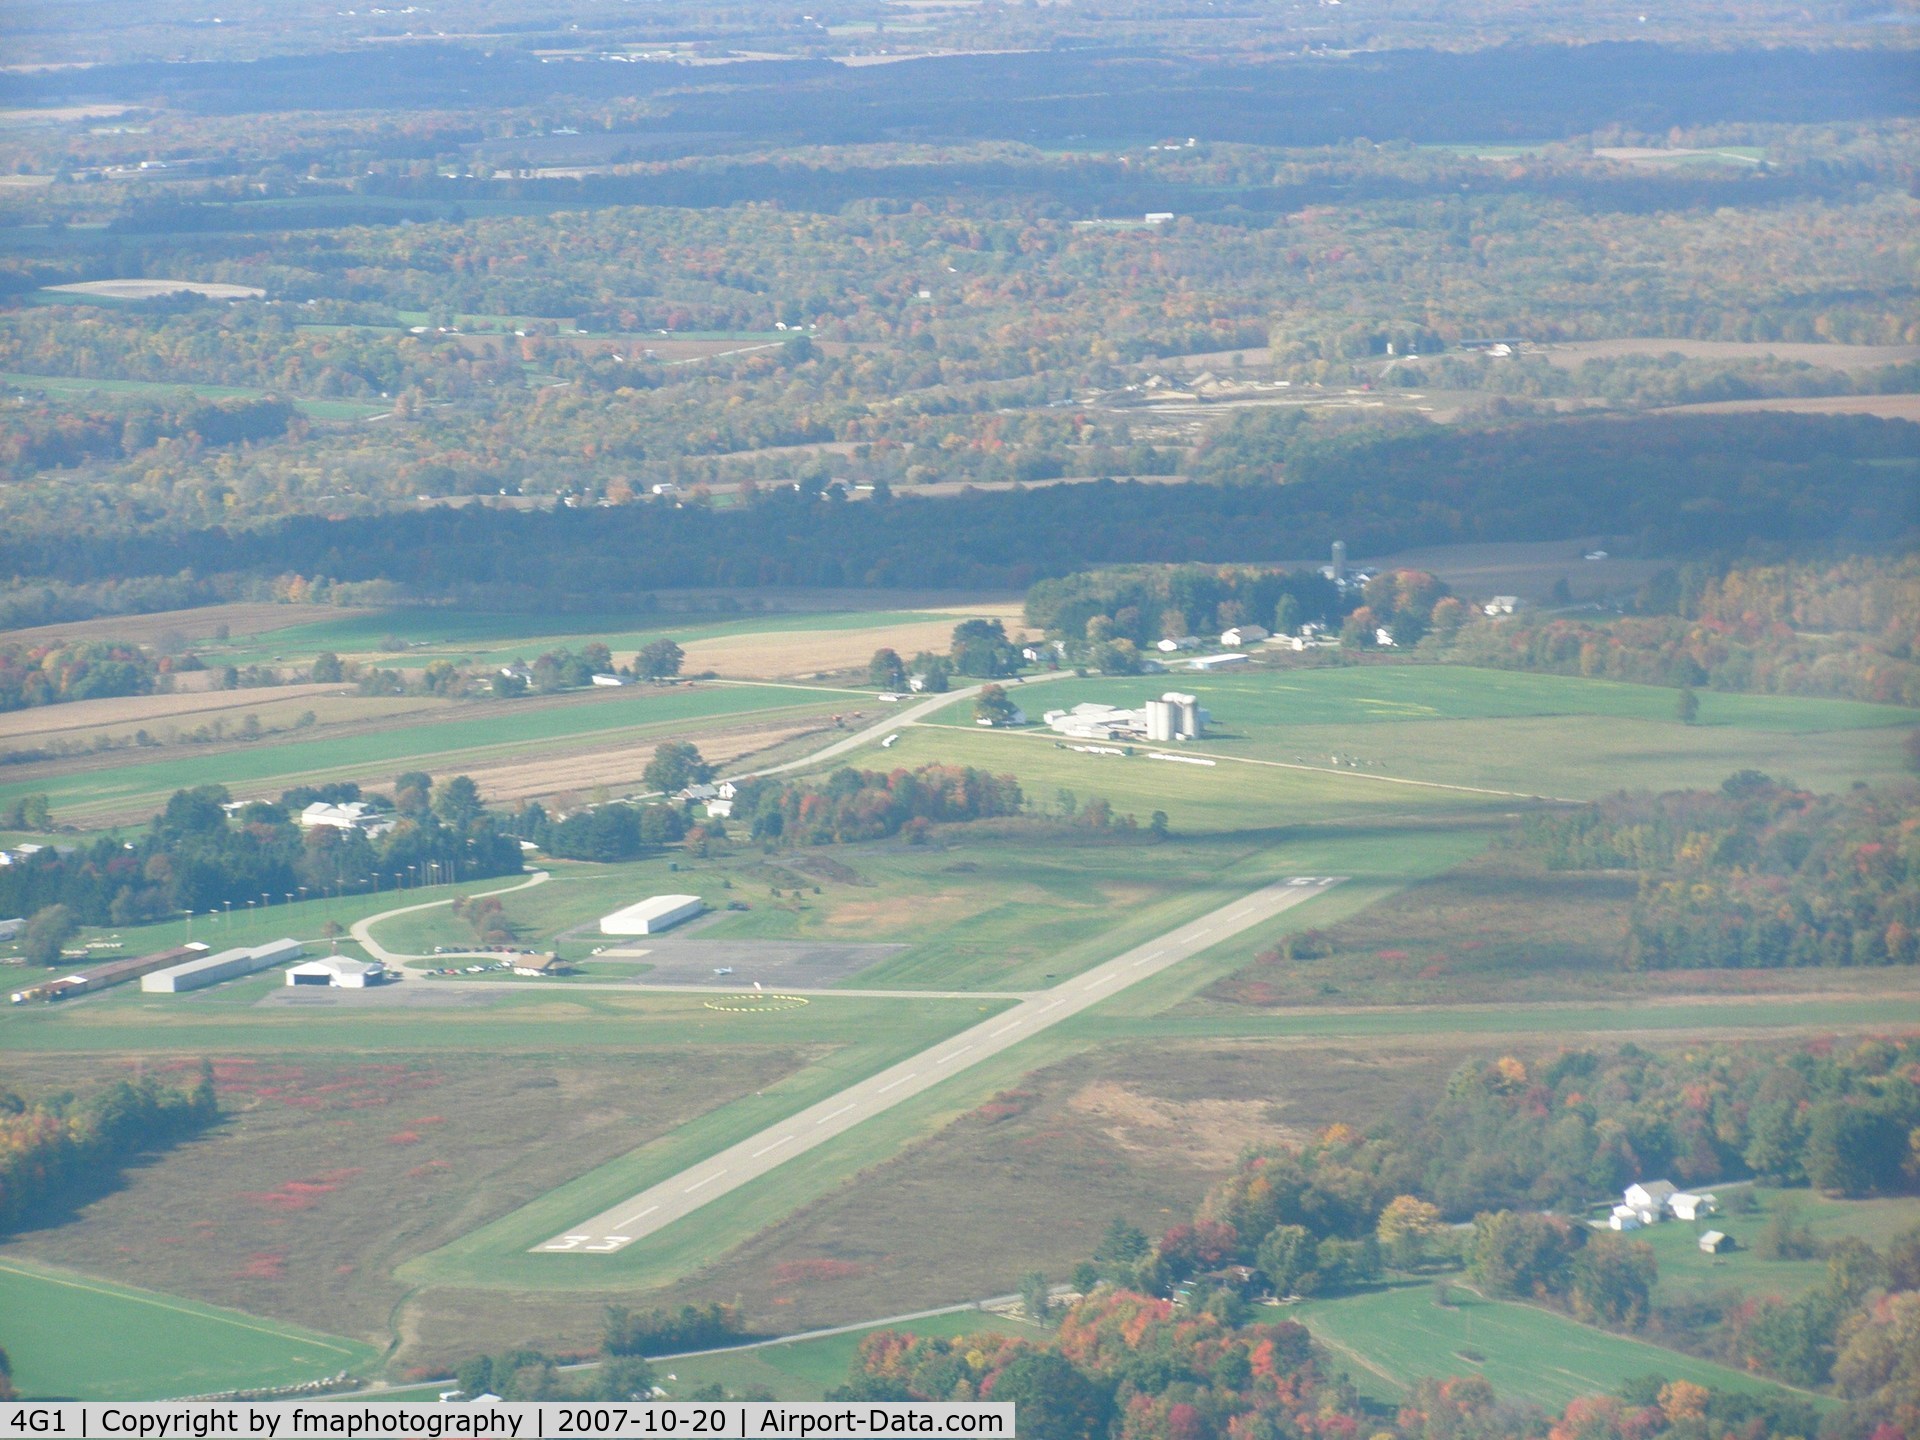 Greenville Municipal Airport (4G1) - Departure out of 4G1